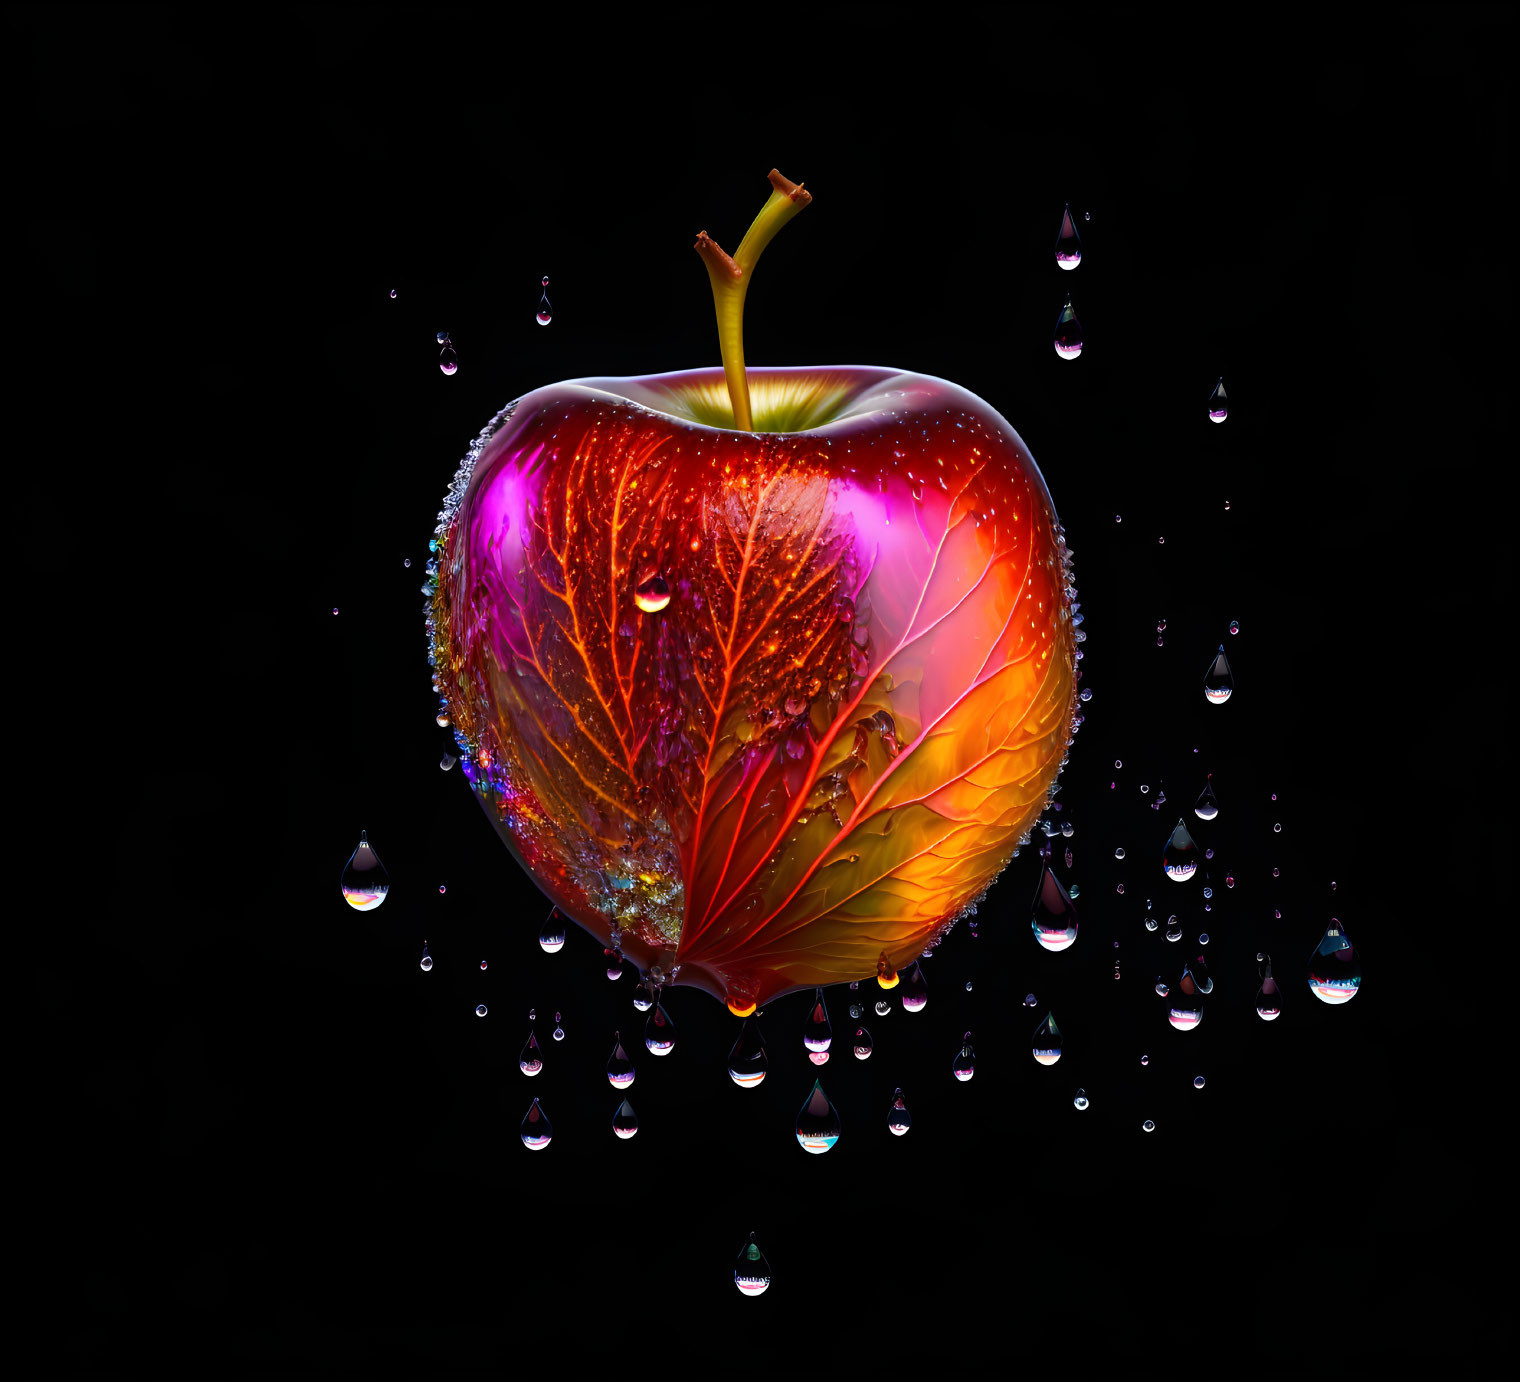 Colorful Apple with Water Splash Effect on Black Background